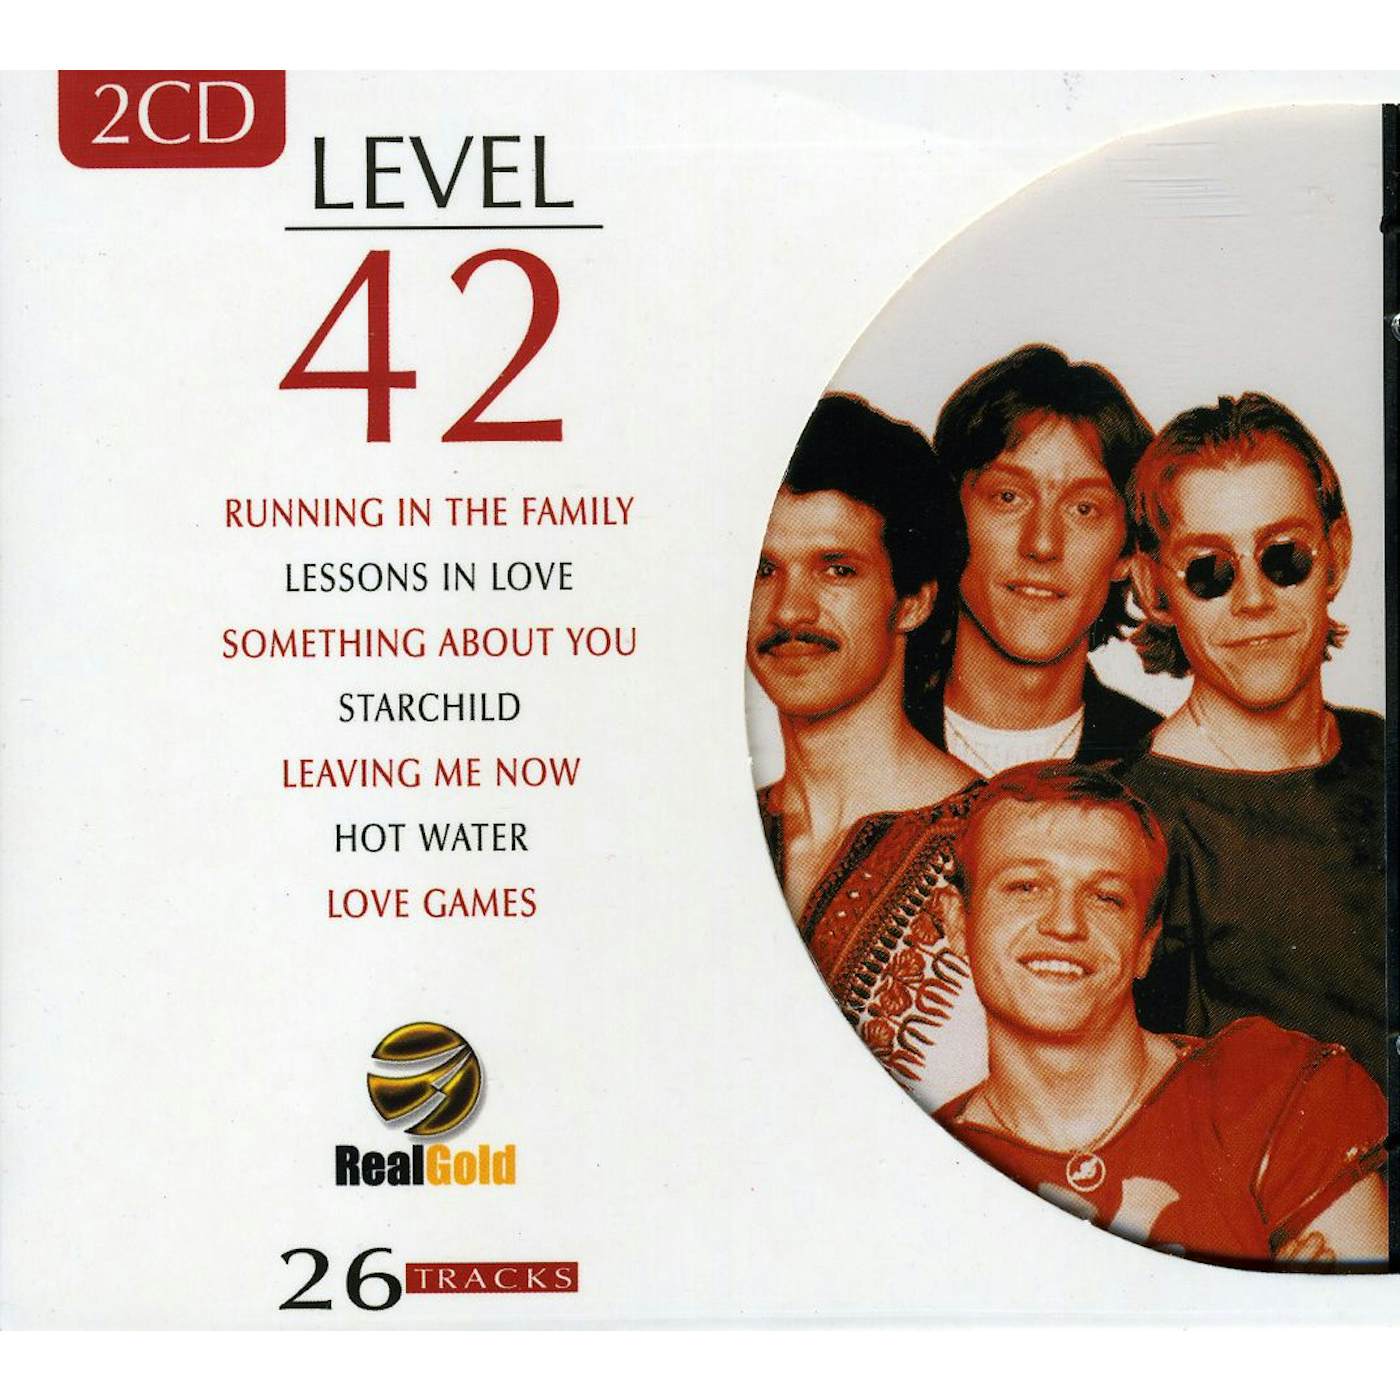 Level 42 REAL GOLD CD